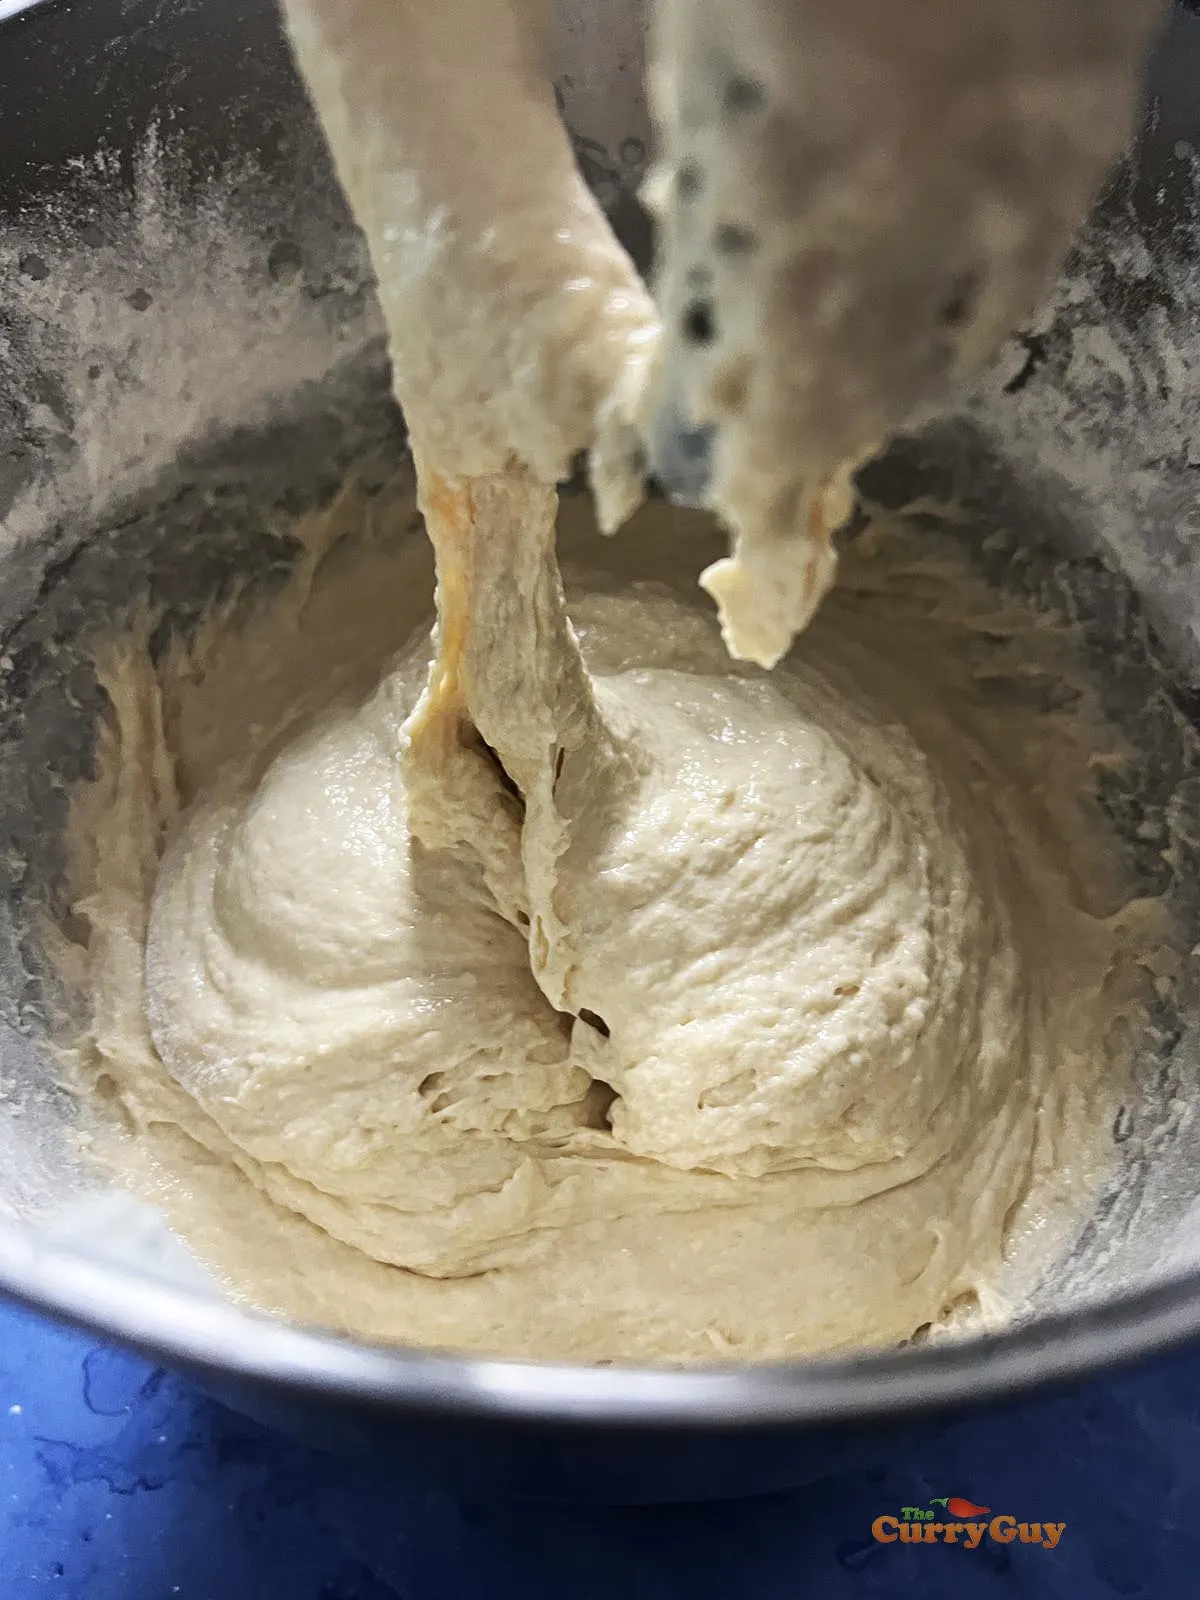 Mixing the wet dough together.